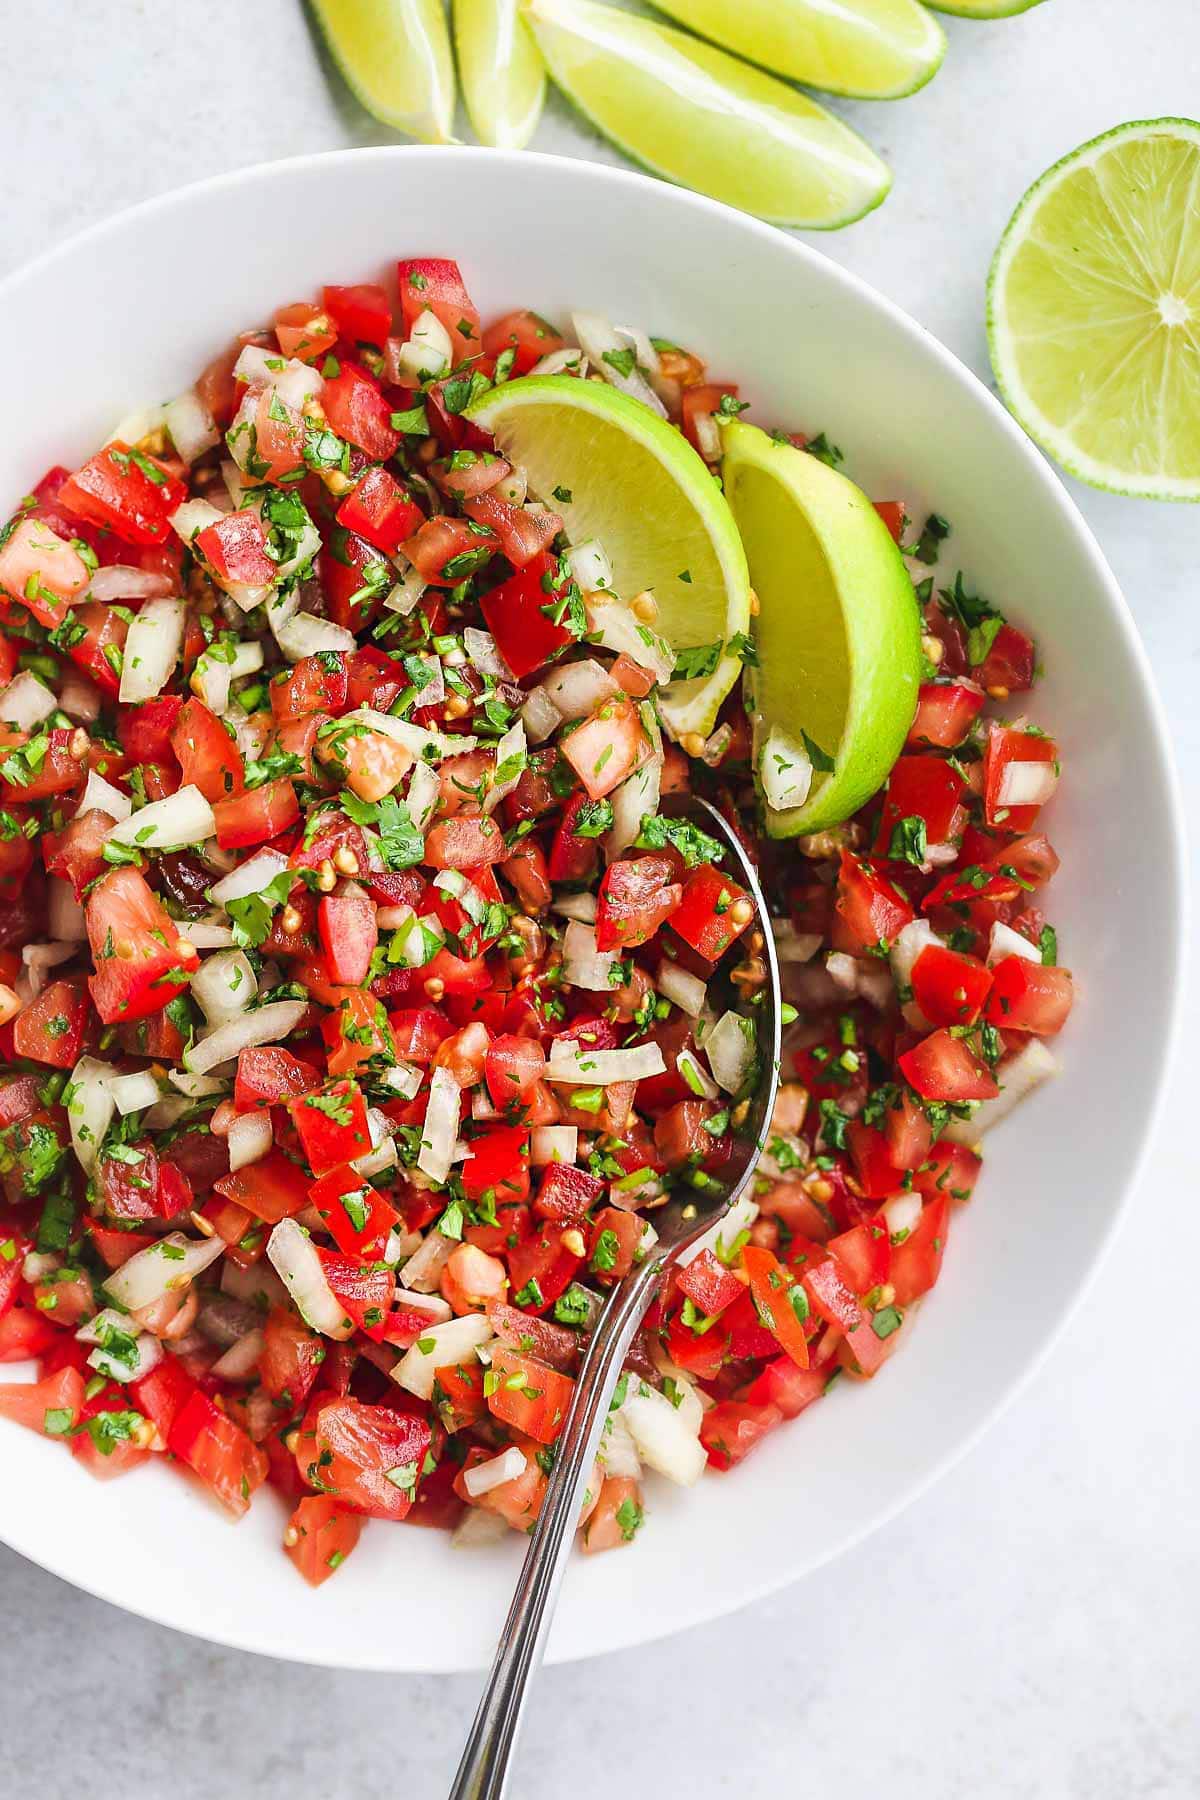 Pico De Gallo Salsa in a white bowl with a serving spoon and lime wedges